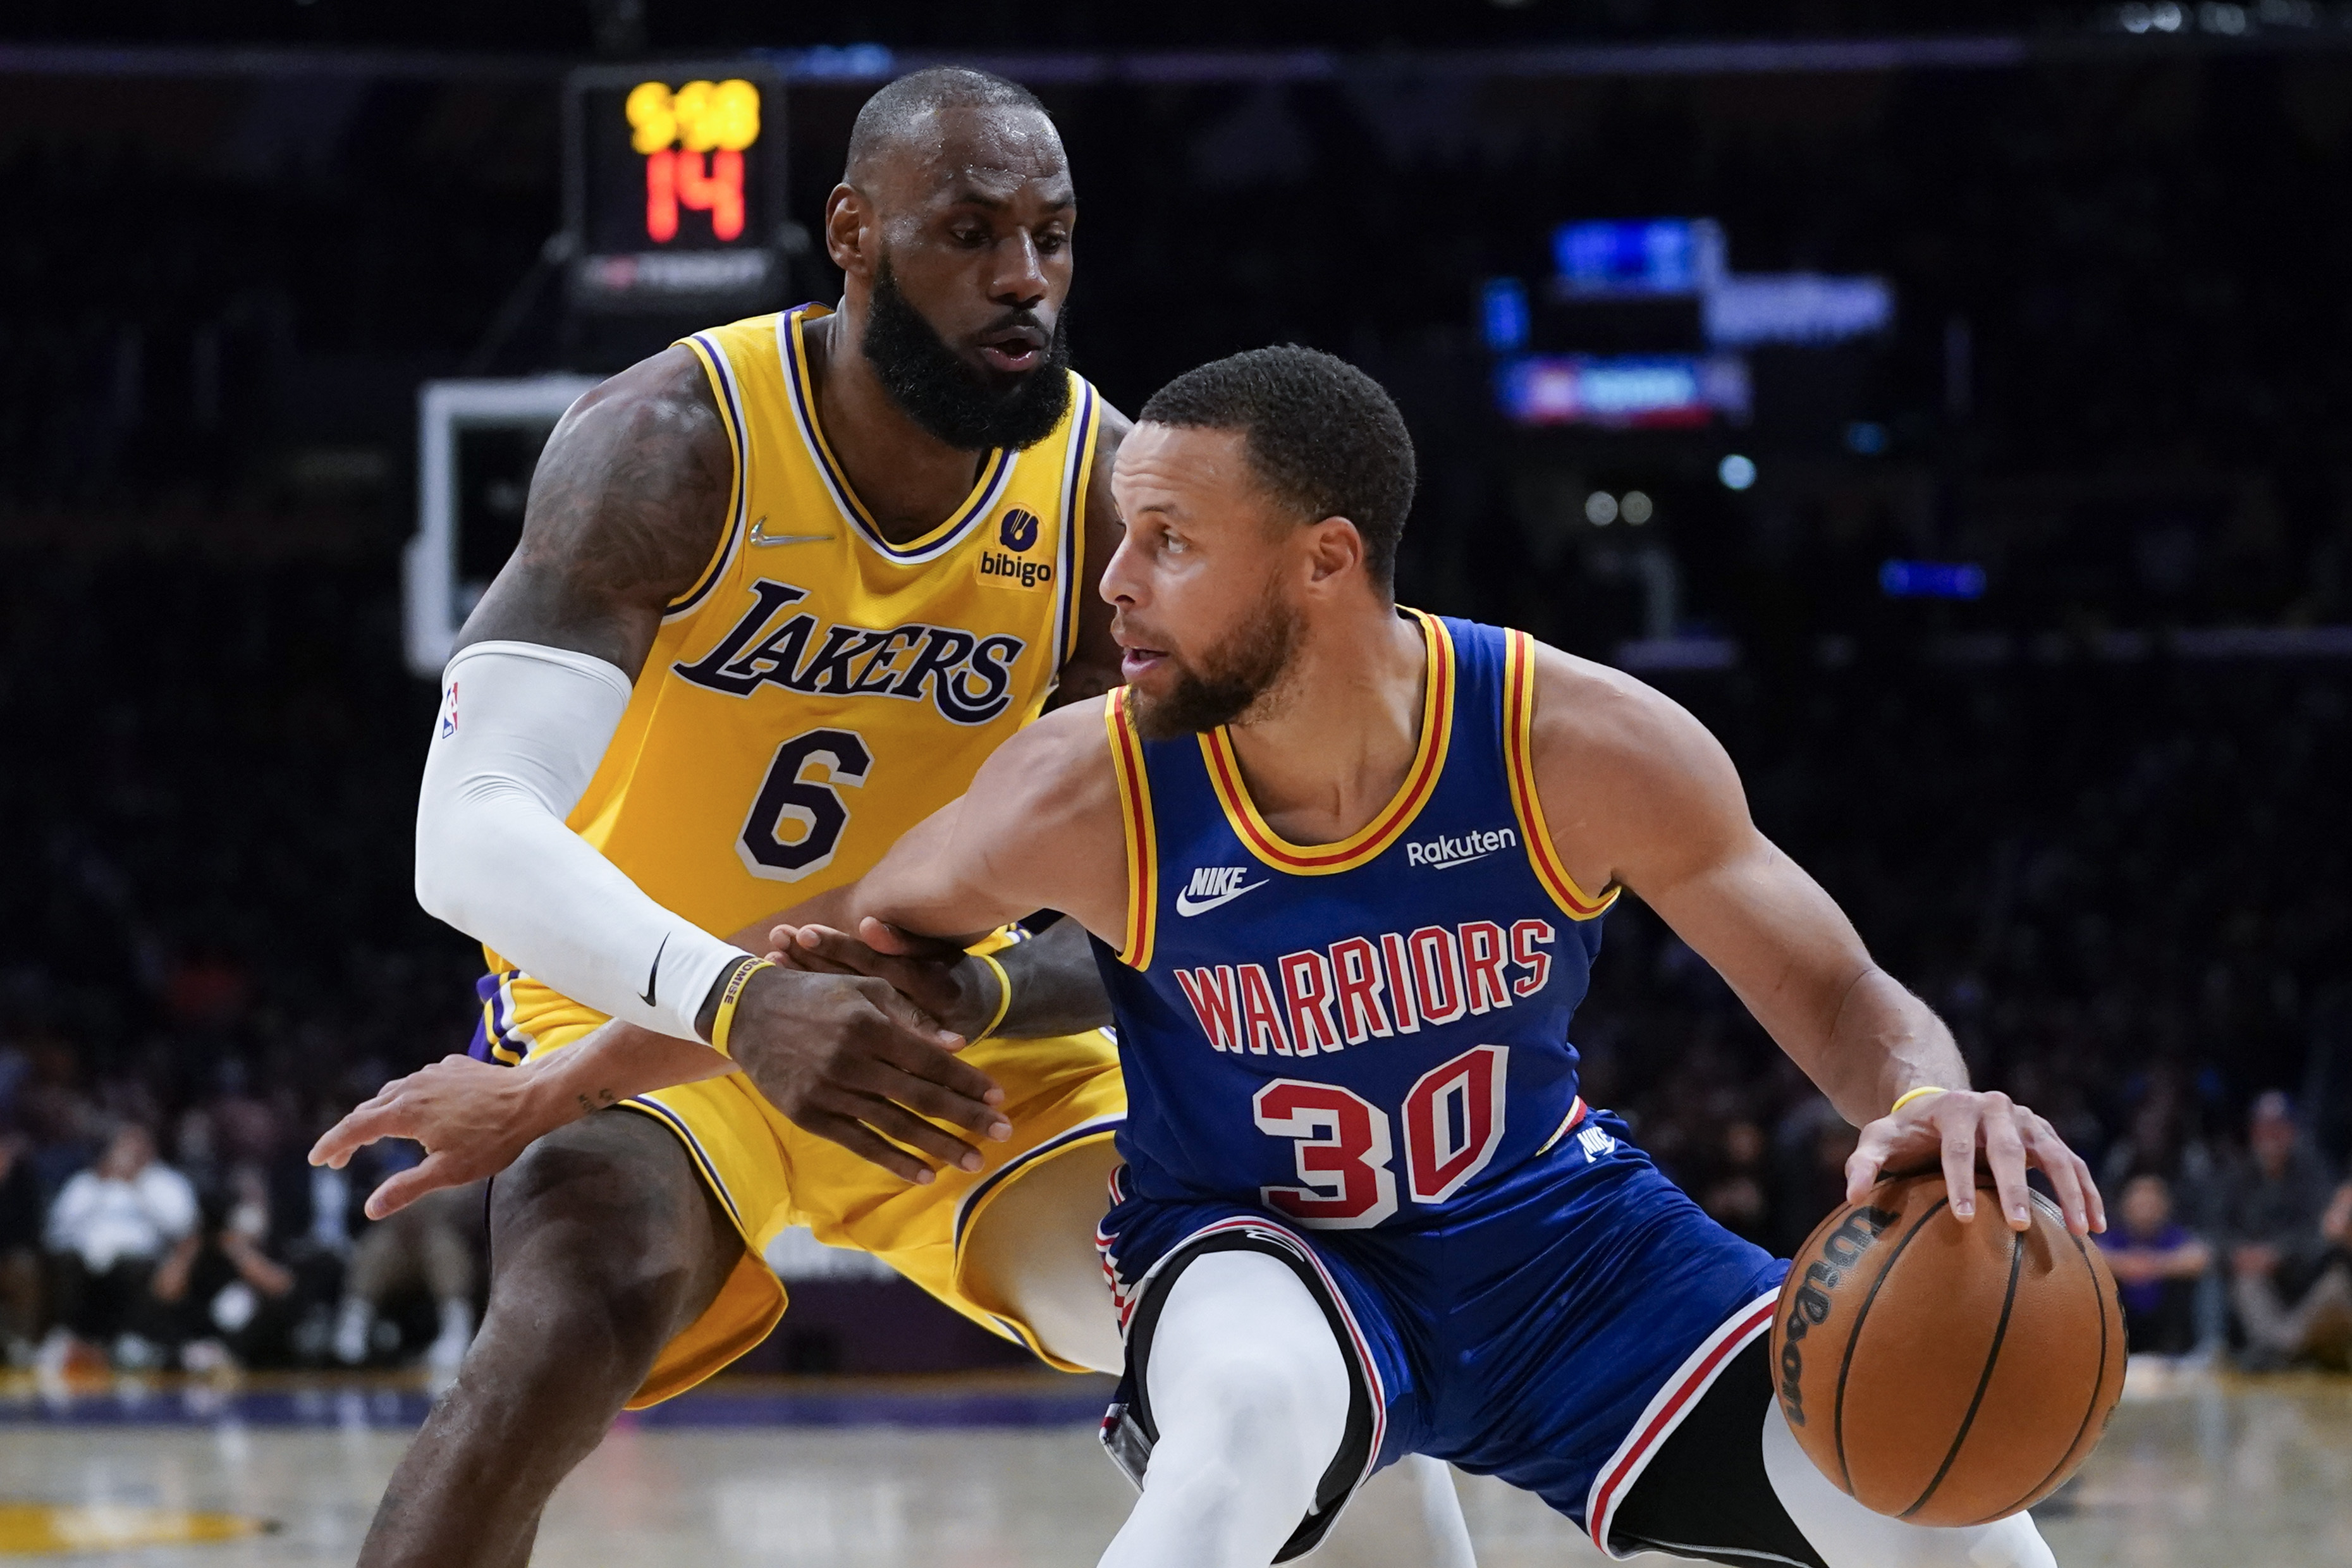 Lakers vs. Warriors live stream: TV channel, how to watch